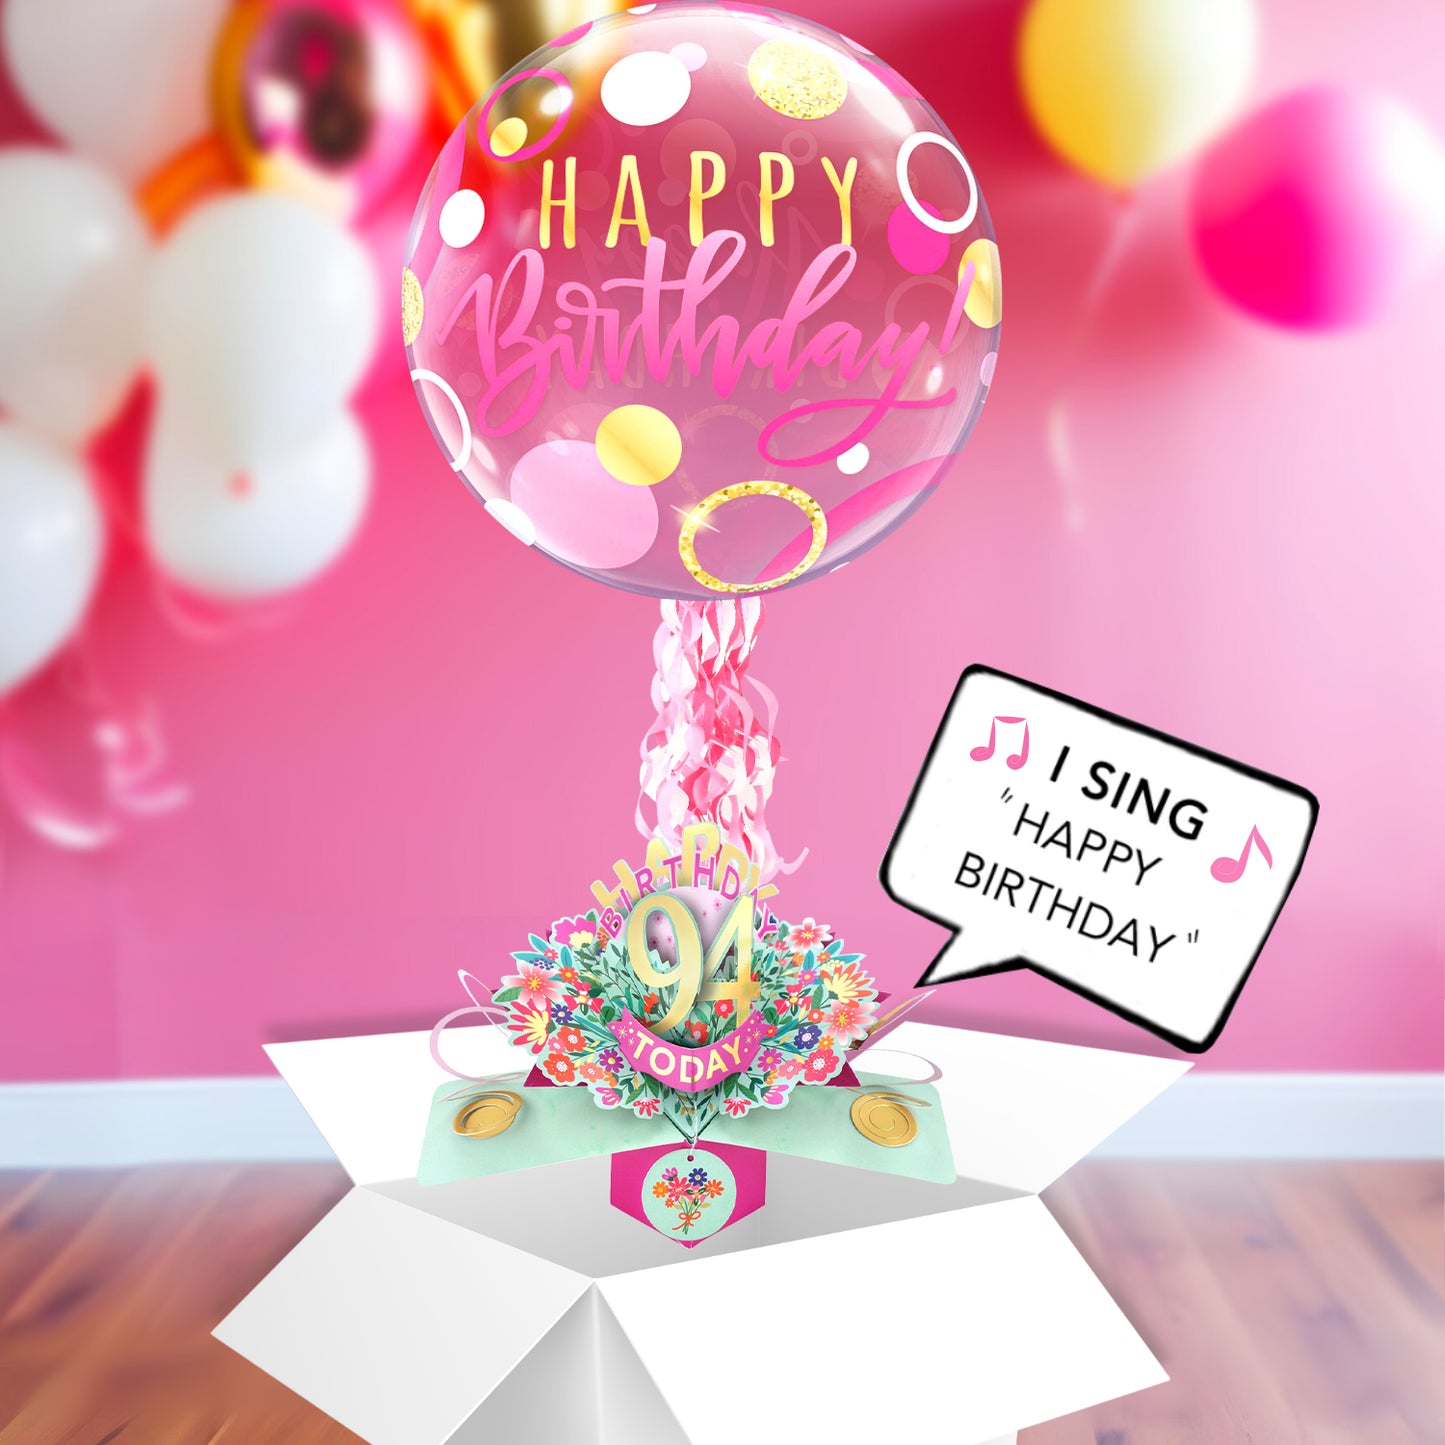 94th Birthday Pop Up Card & Musical Balloon Surprise Delivered In A Box For Her